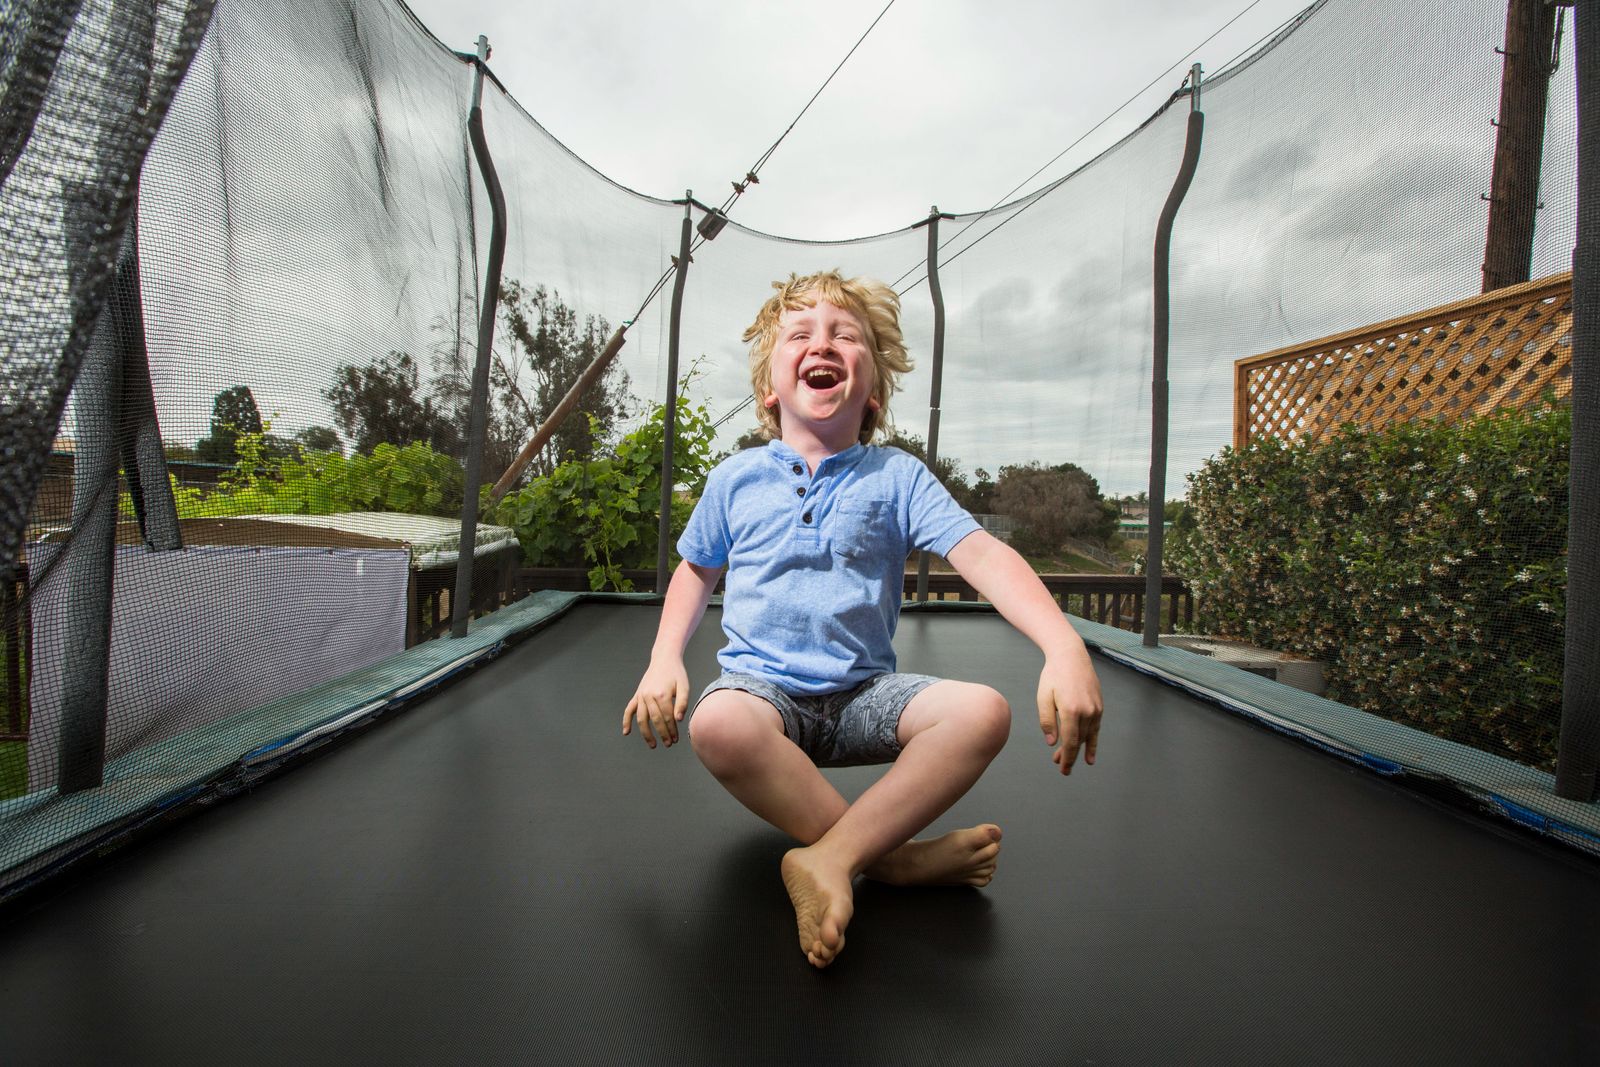 © Karen Haberberg - Image from the An Ordinary Day - Kids with Rare Genetic Conditions photography project